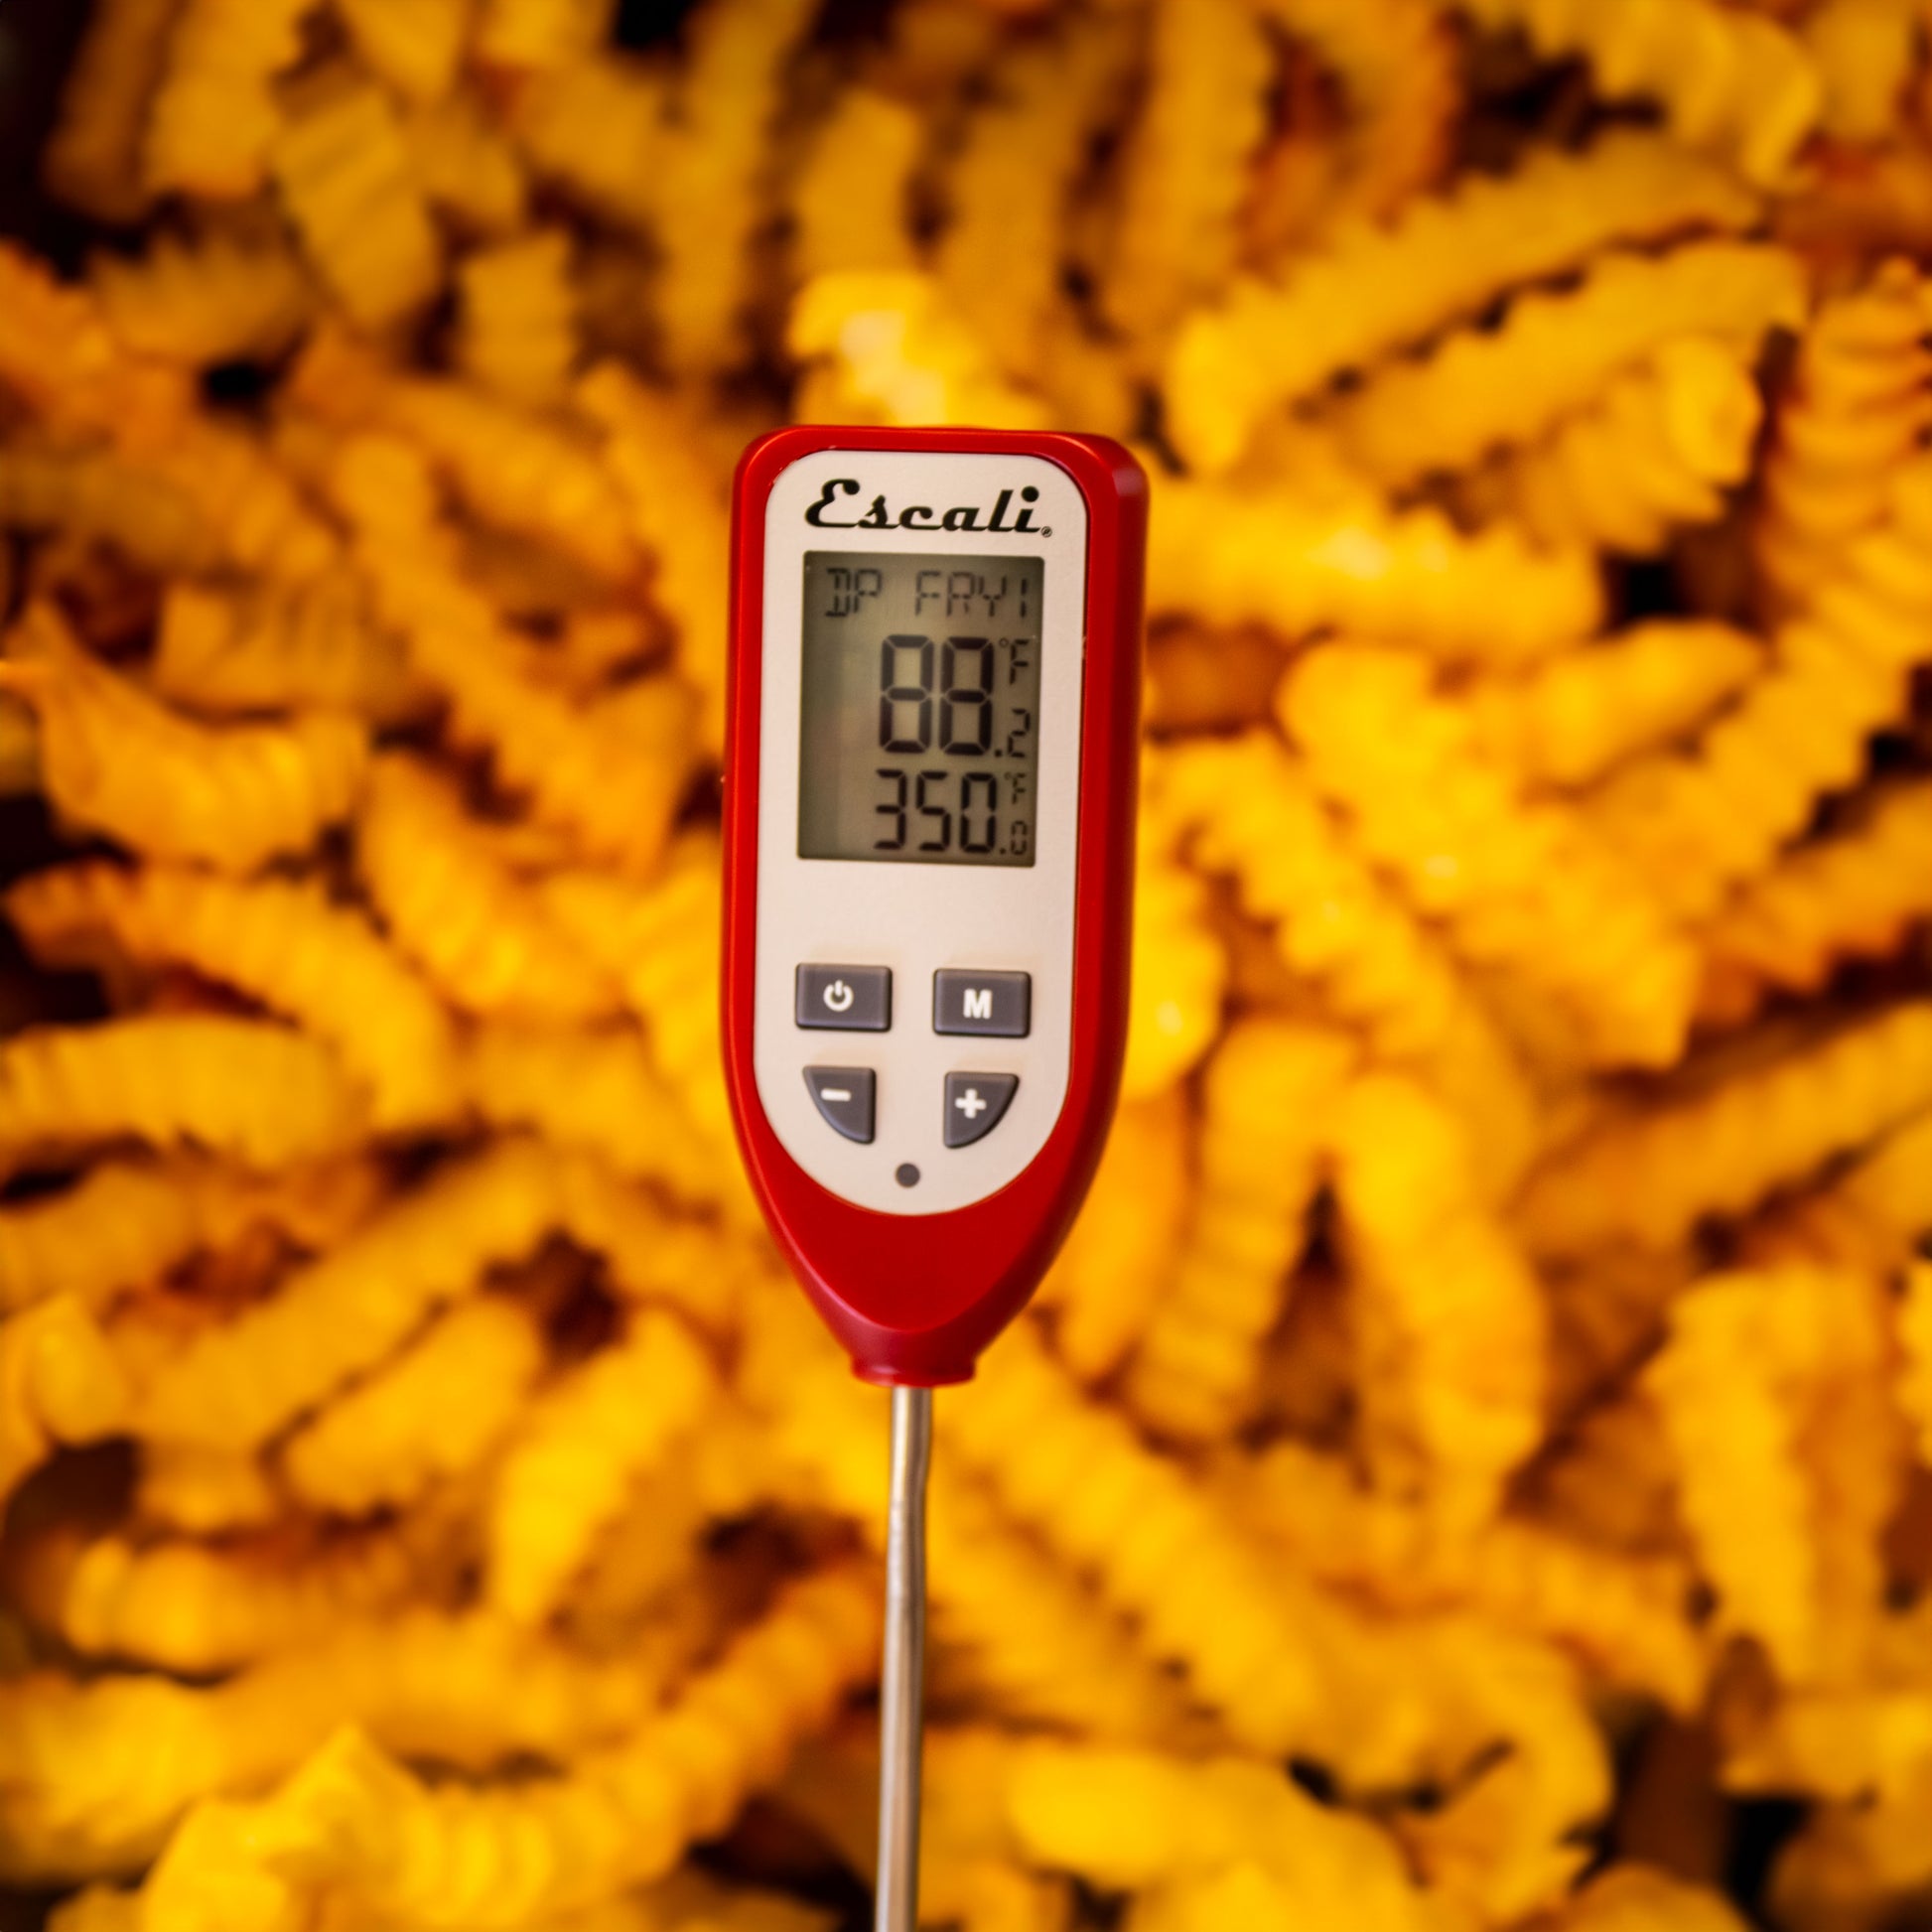 Candy / Deep Fry Dial Thermometer – KitchenSupply